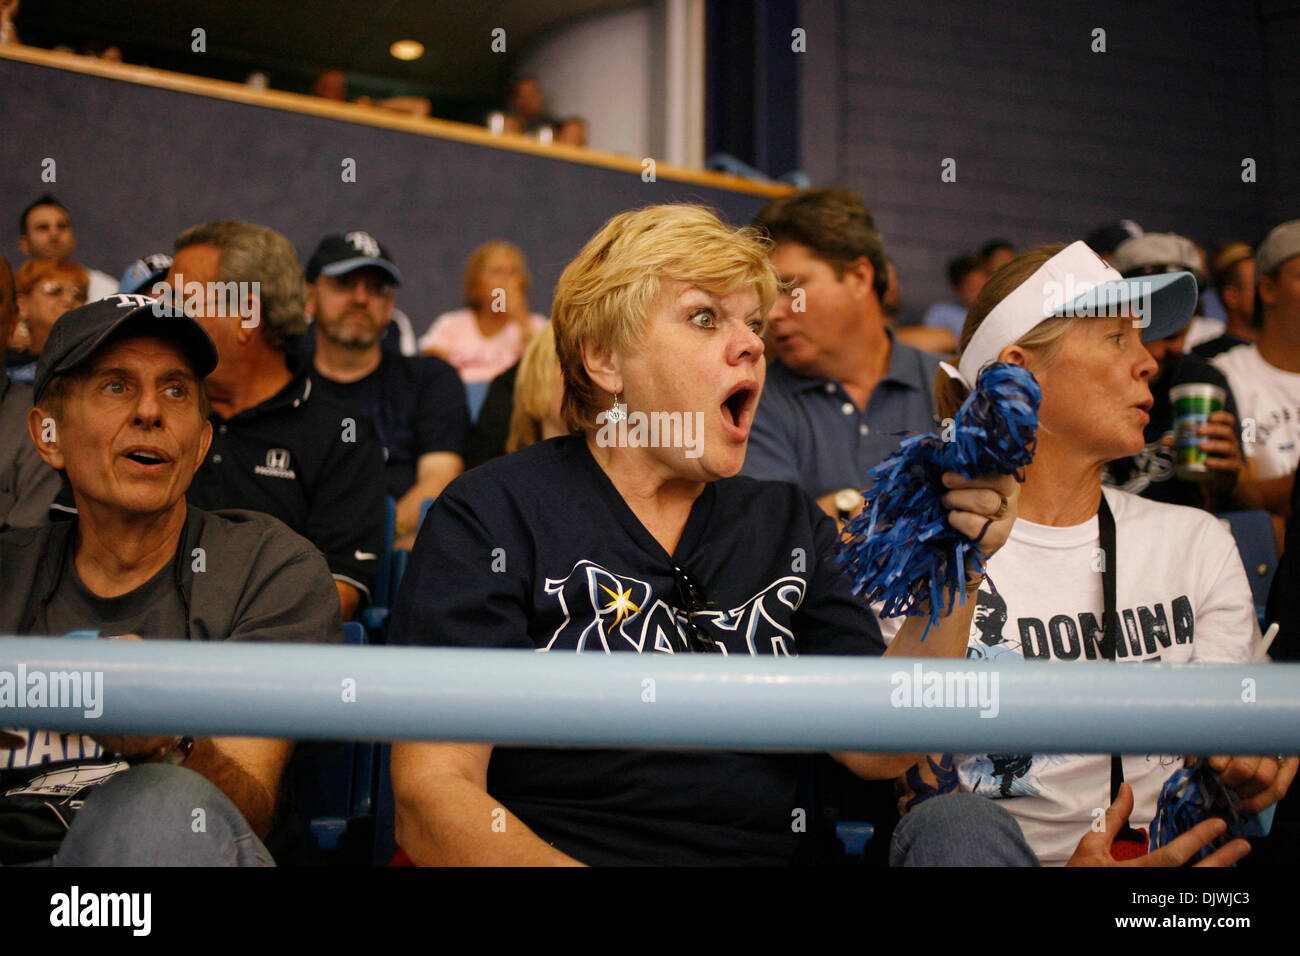 Oct. 7, 2010 - St. Petersburg - CHRIS ZUPPA   |   Times.SP 329225 ZUPP Rays 13.(St. Petersburg, 10/07/2010) (left to right) Tampa Bay Rays fans Frank Casorio of St. Pete Beach, his wife, Dianne Casorio of St. Pete Beach and her friend, Debbie Haynes of Gulfport react to the end of the sixth inning. Tampa Bay Rays play the Texas Rangers for game two of the ALDS at Tropicana Field. [ Stock Photo